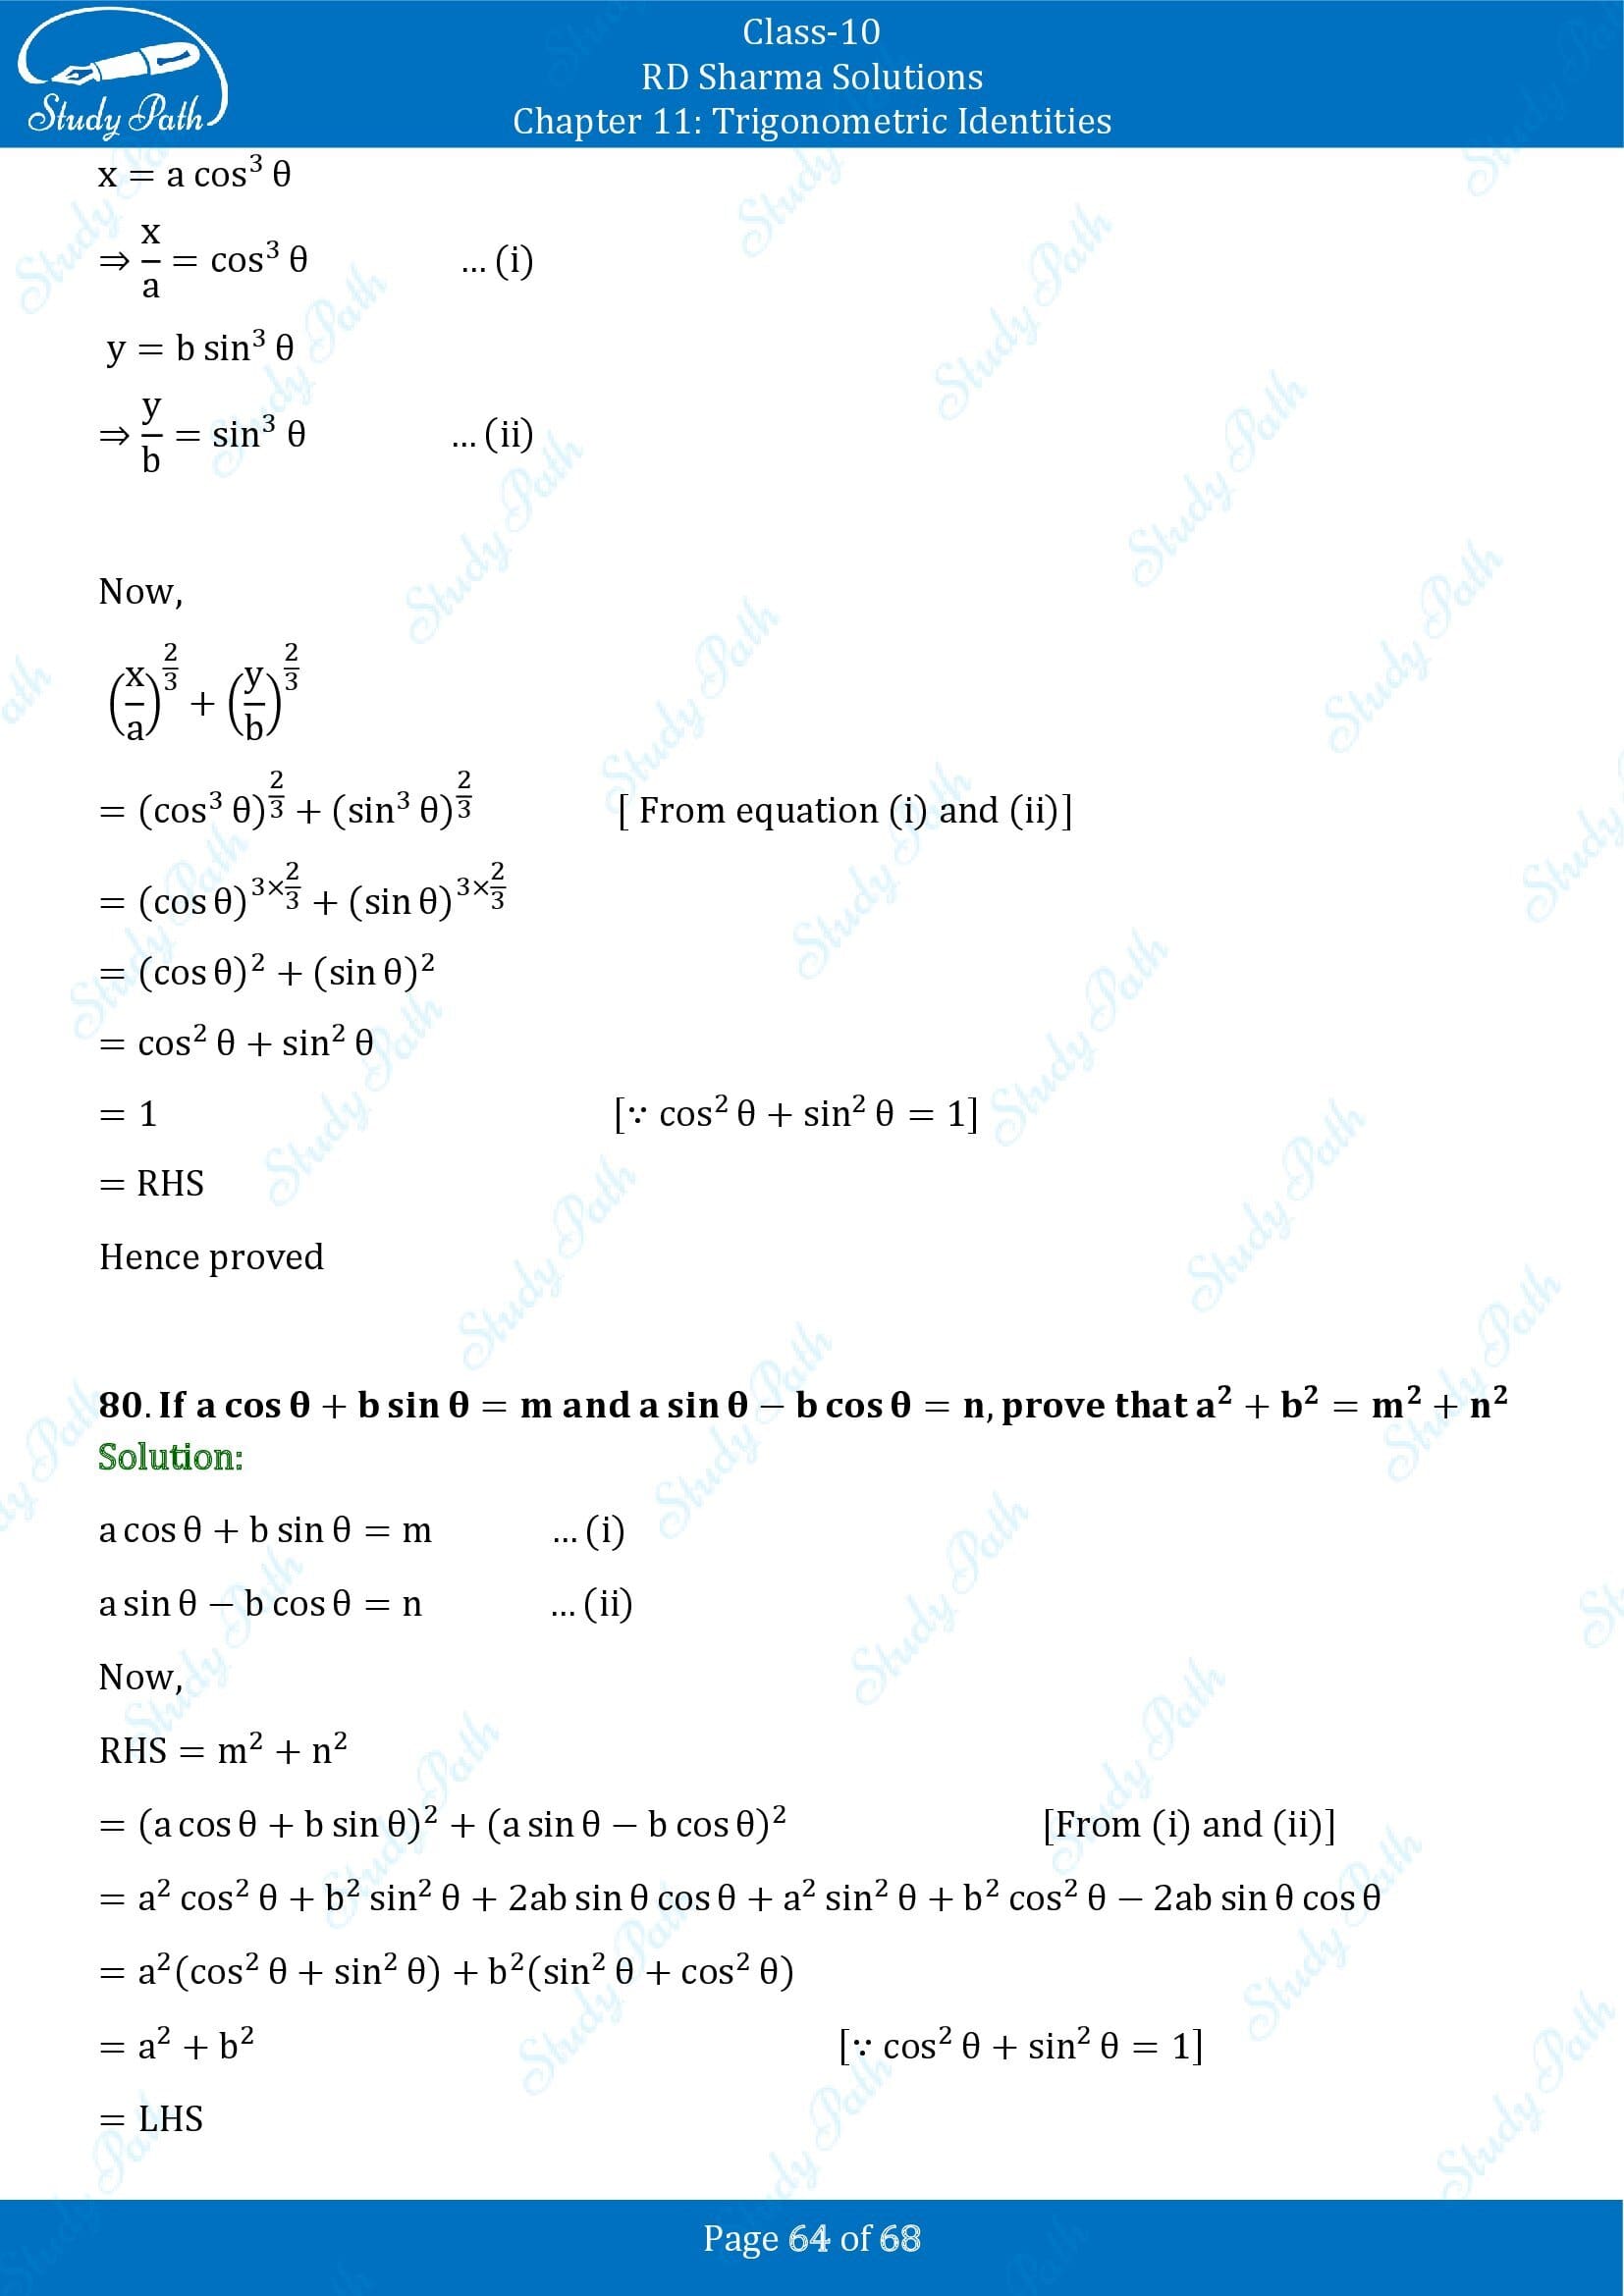 RD Sharma Solutions Class 10 Chapter 11 Trigonometric Identities Exercise 11.1 00064